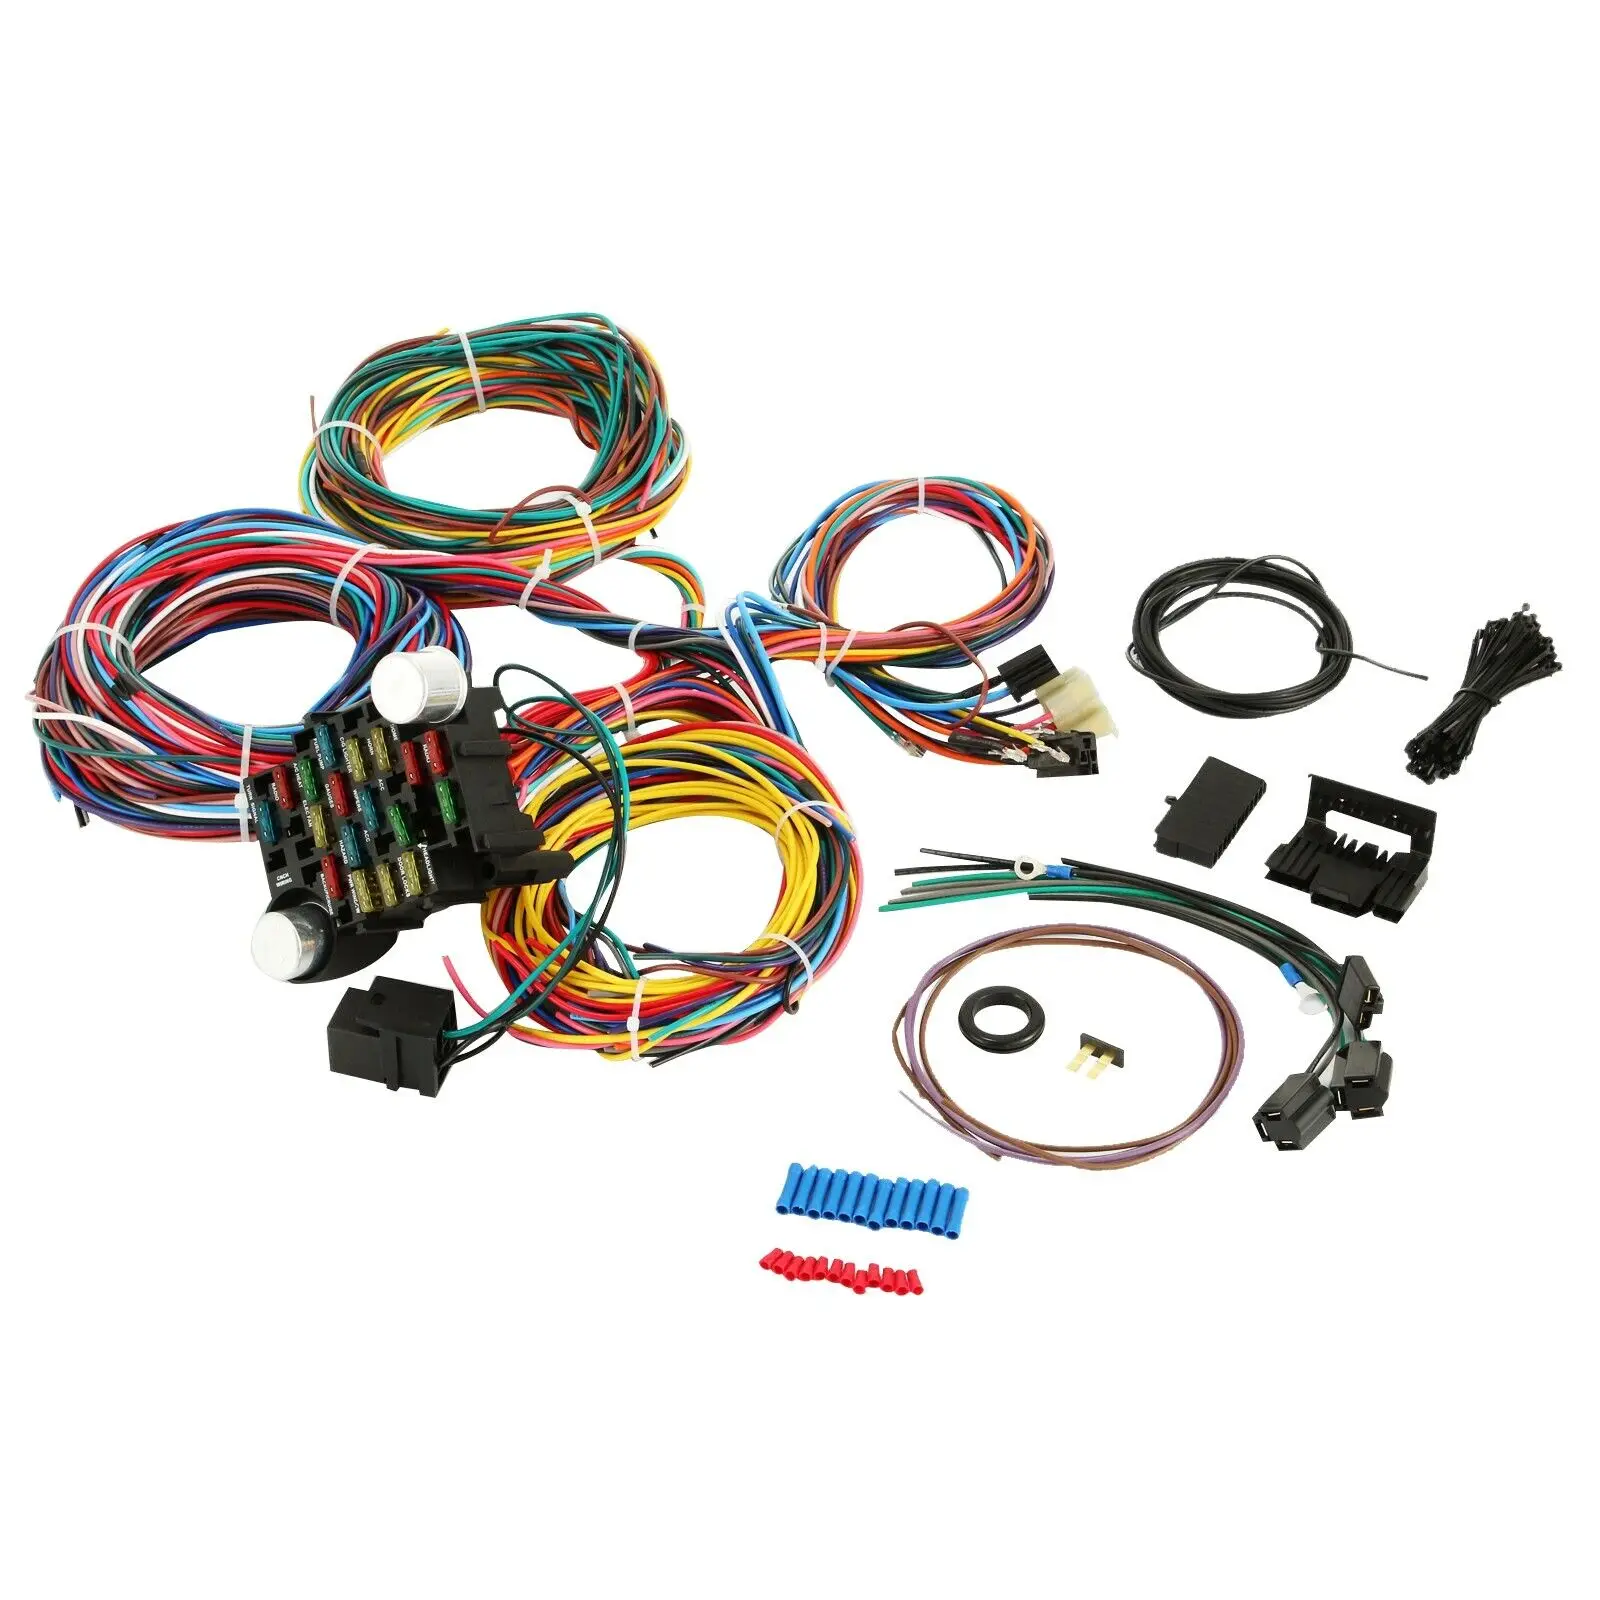 Fuse Box Kit 18 Circuit Wiring Harness - Buy Auto Chassis Wiring